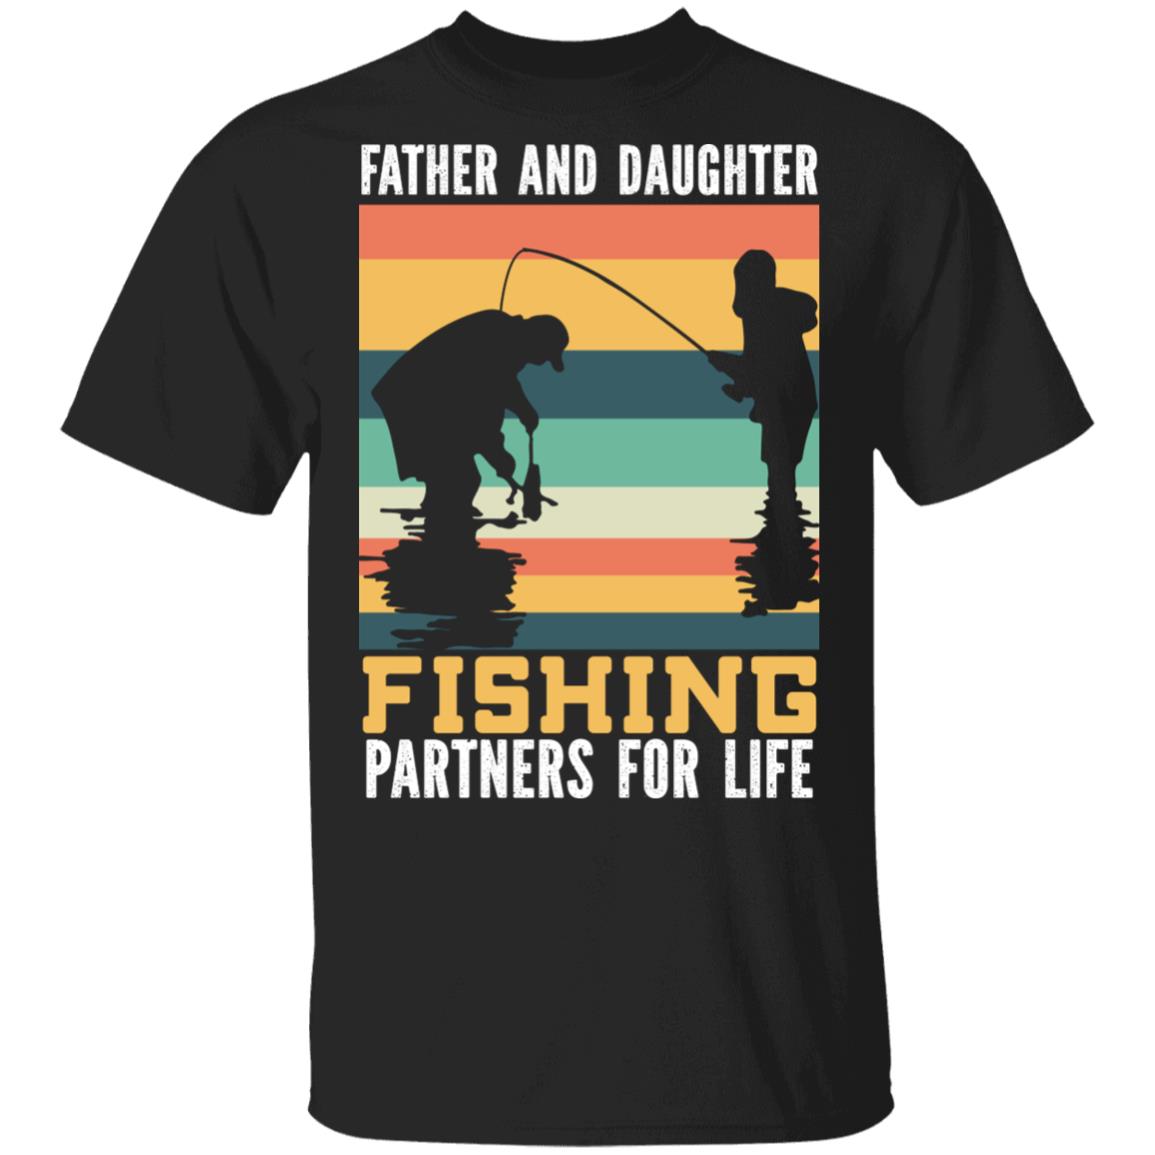 Home - AmazeTees - Trending Shirts For Everyone